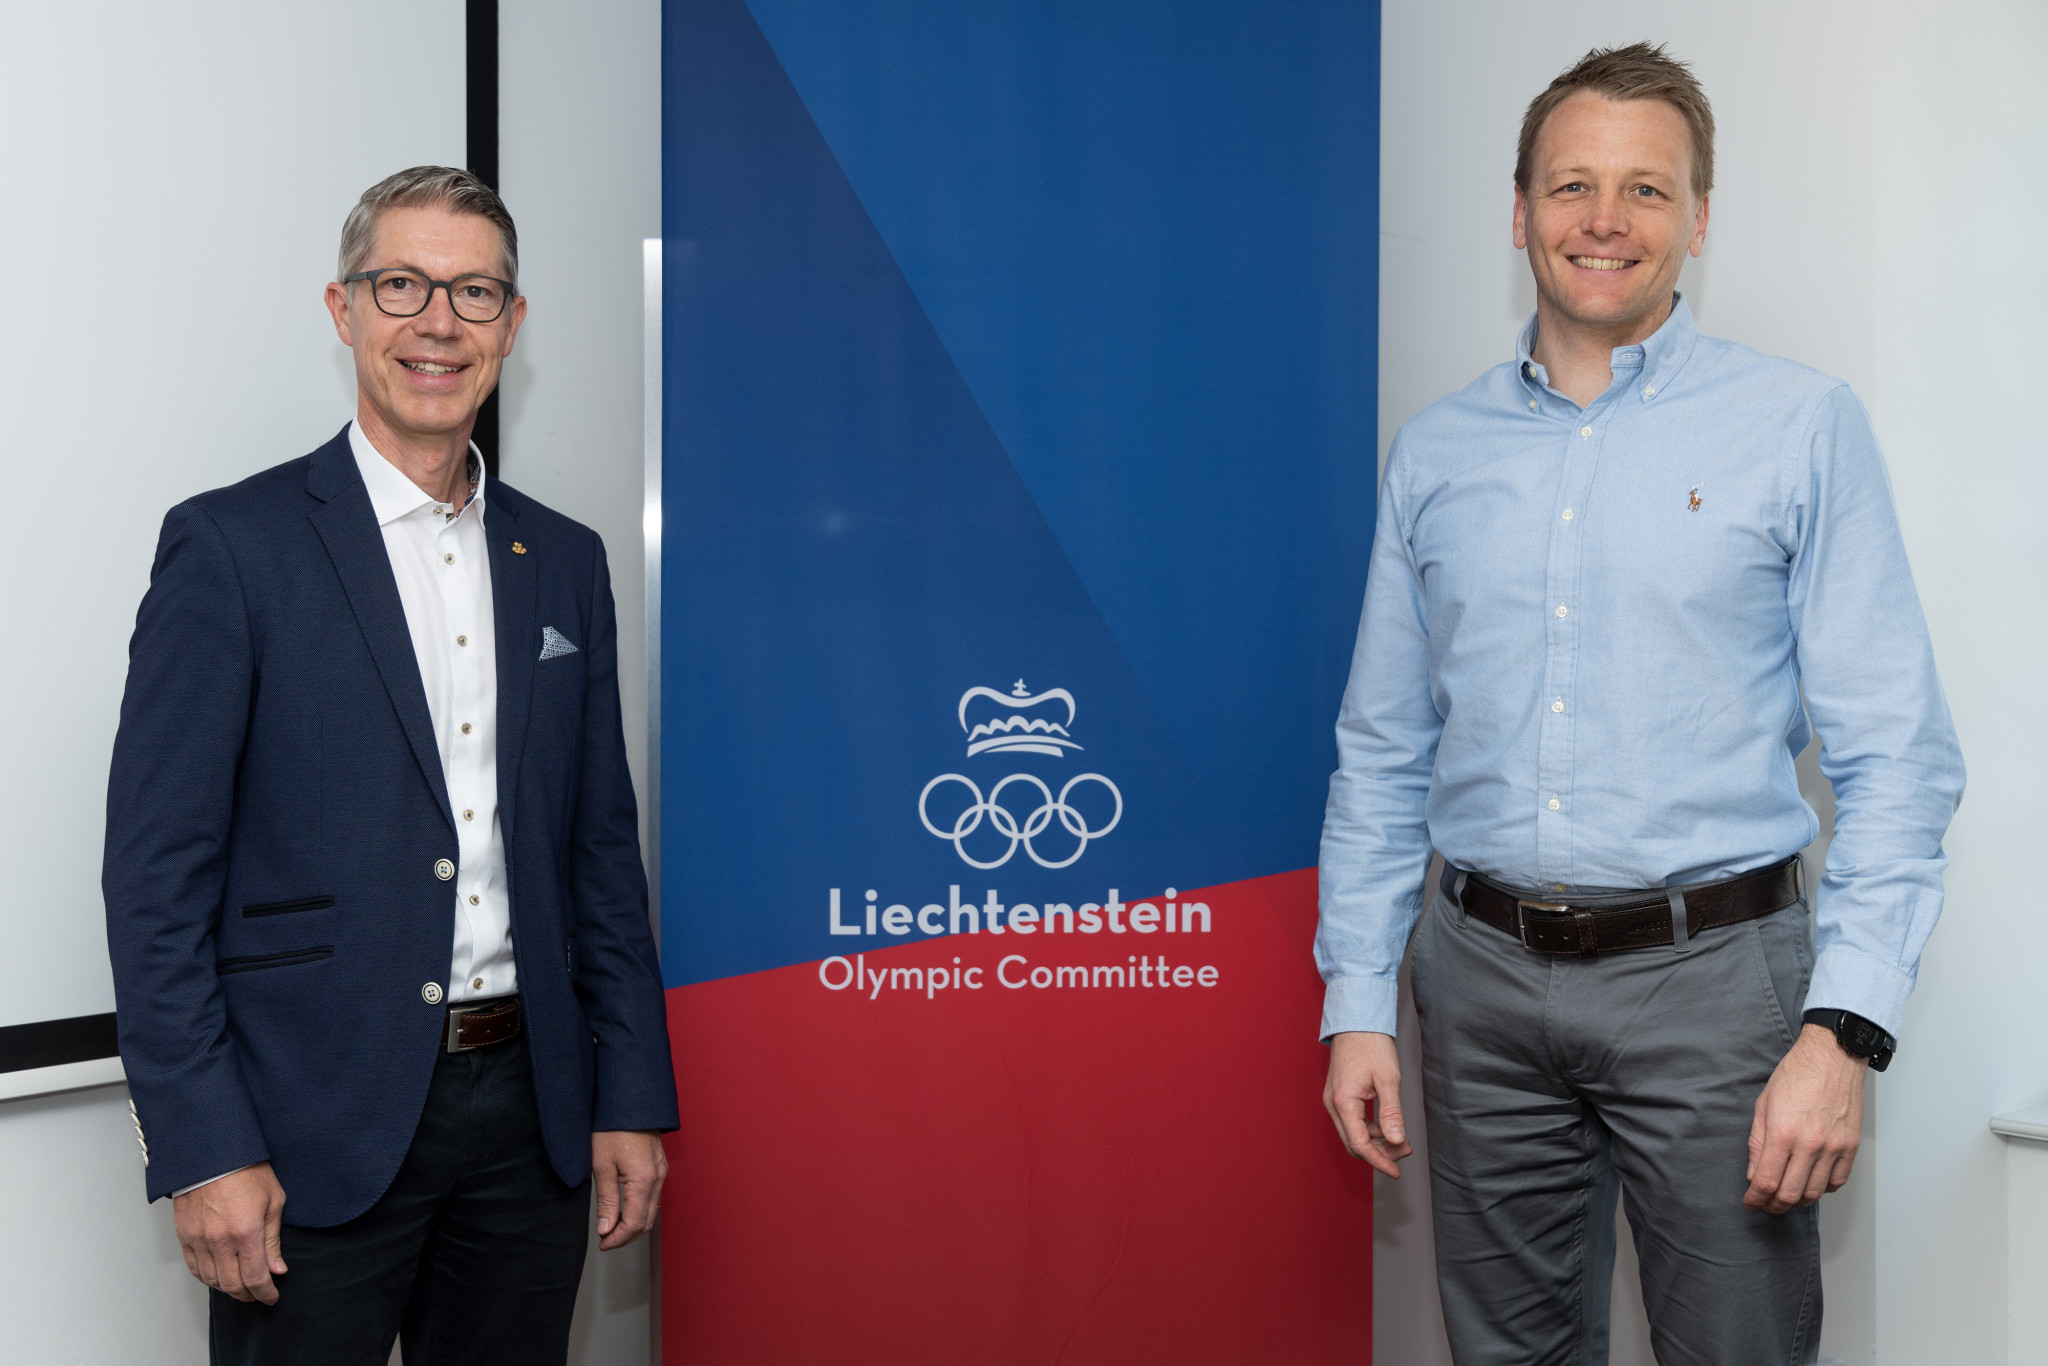 Liechtenstein Olympic Committee President Stefan Marxer, left, and general secretary Beat Wachter have been involved in the organisation developing its new vision and strategy from 2021 to 2024 ©LOC